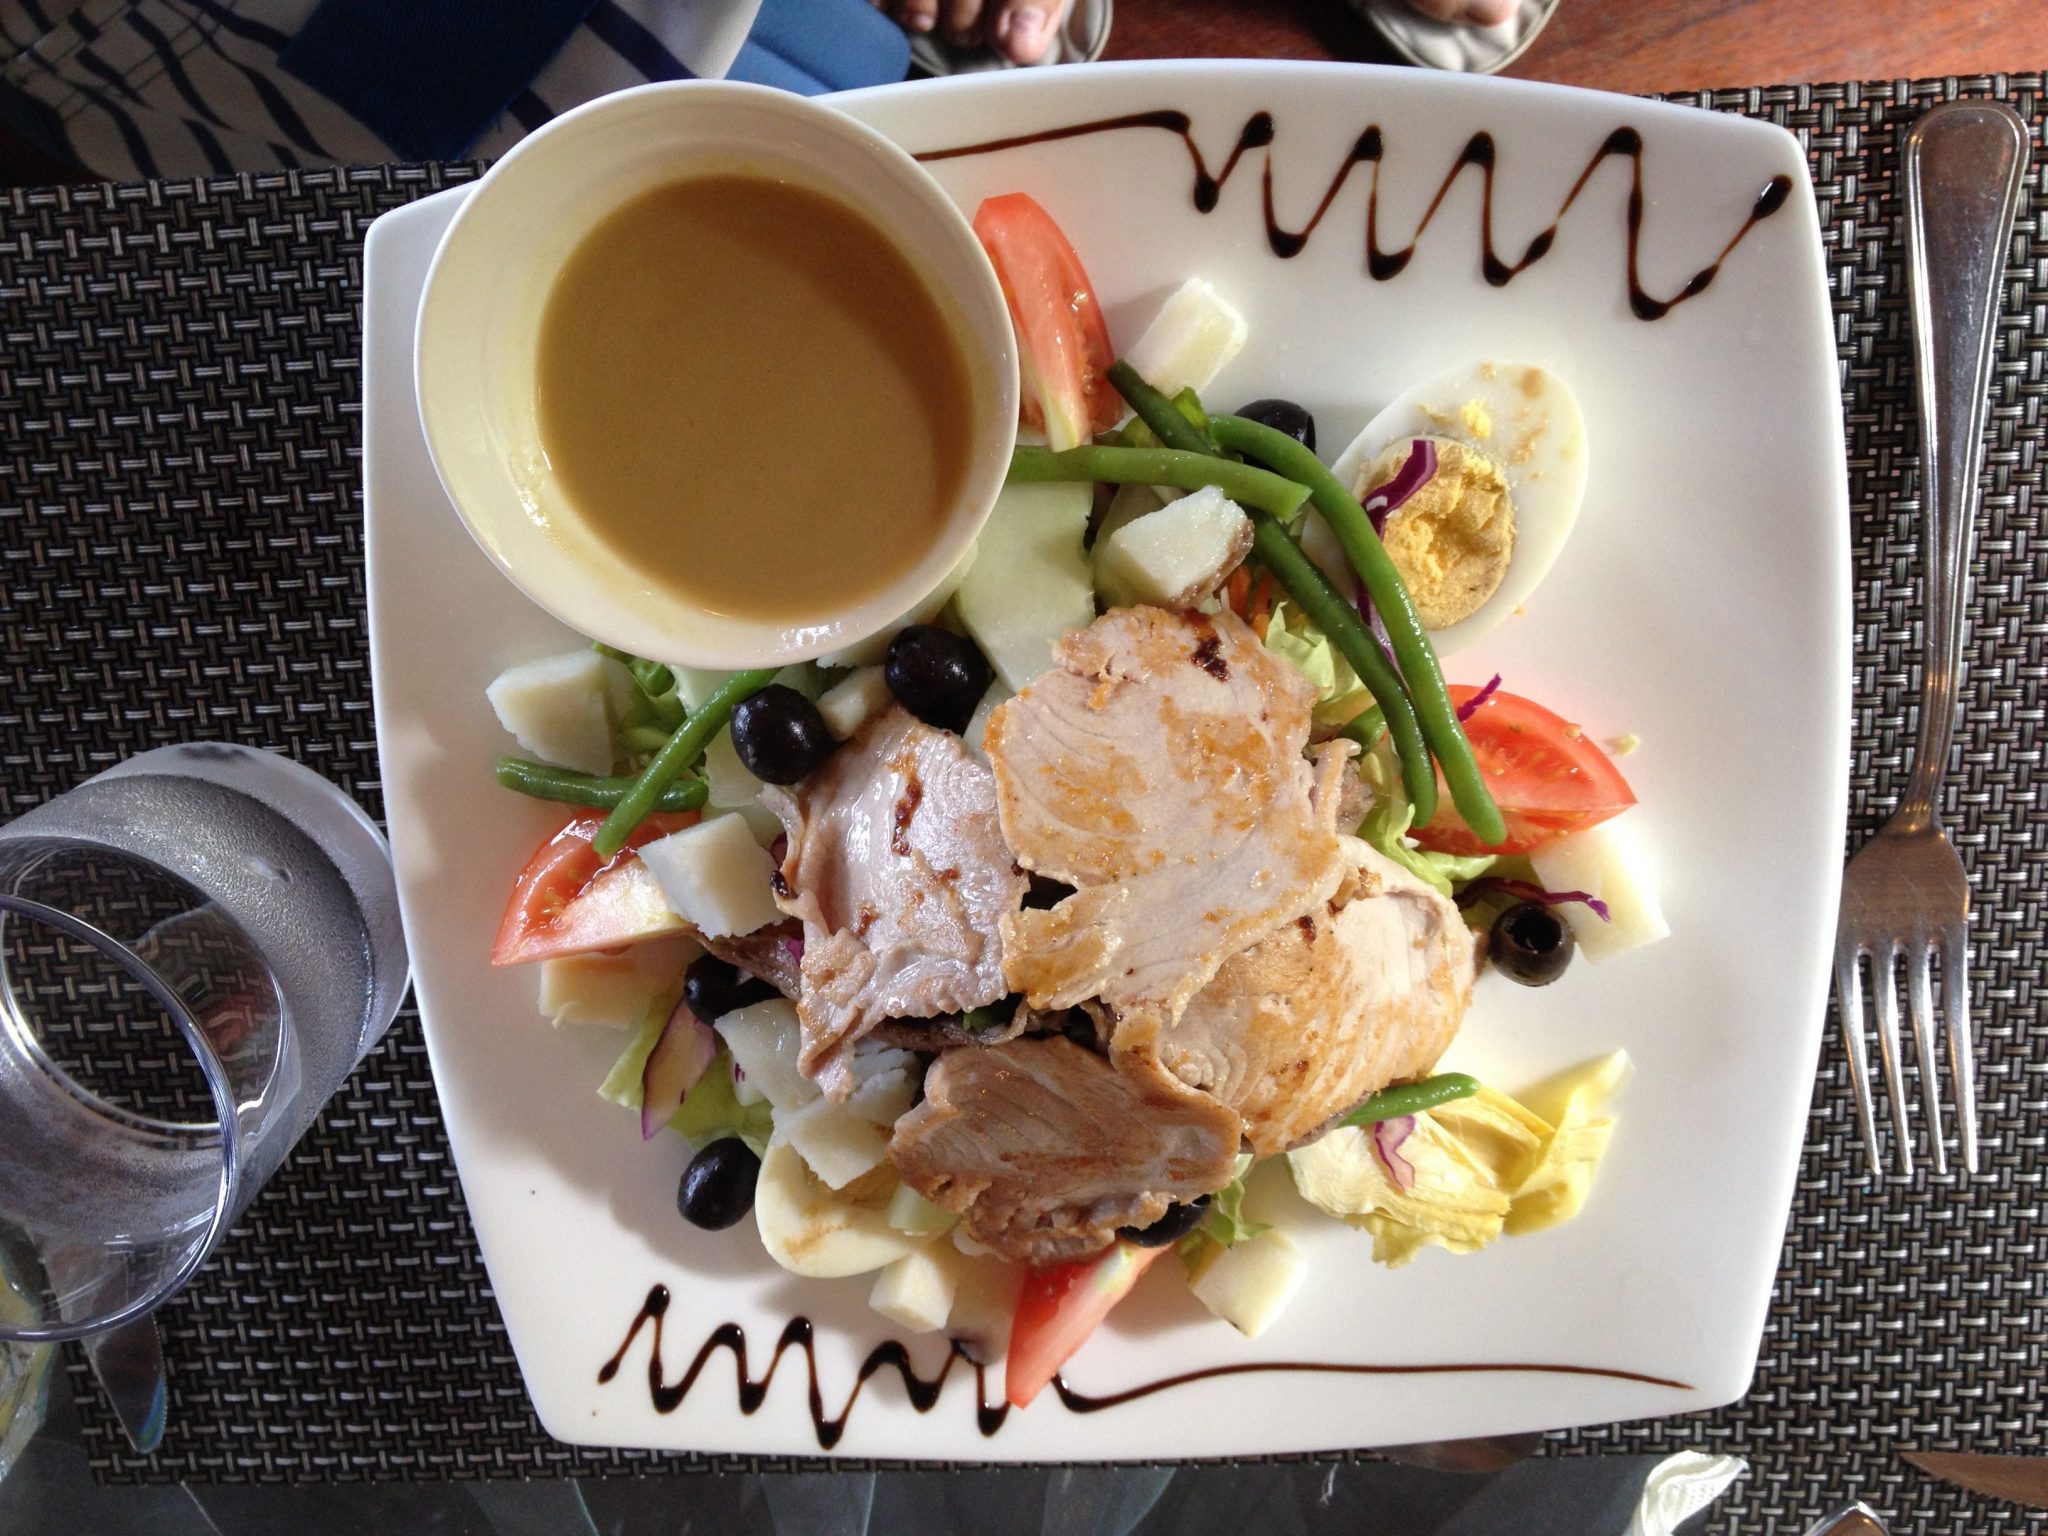 41. In Bora Bora, we enjoyed eating both traditional Polynesian foods as well as French dishes like this scrumptious salade Niçoise.